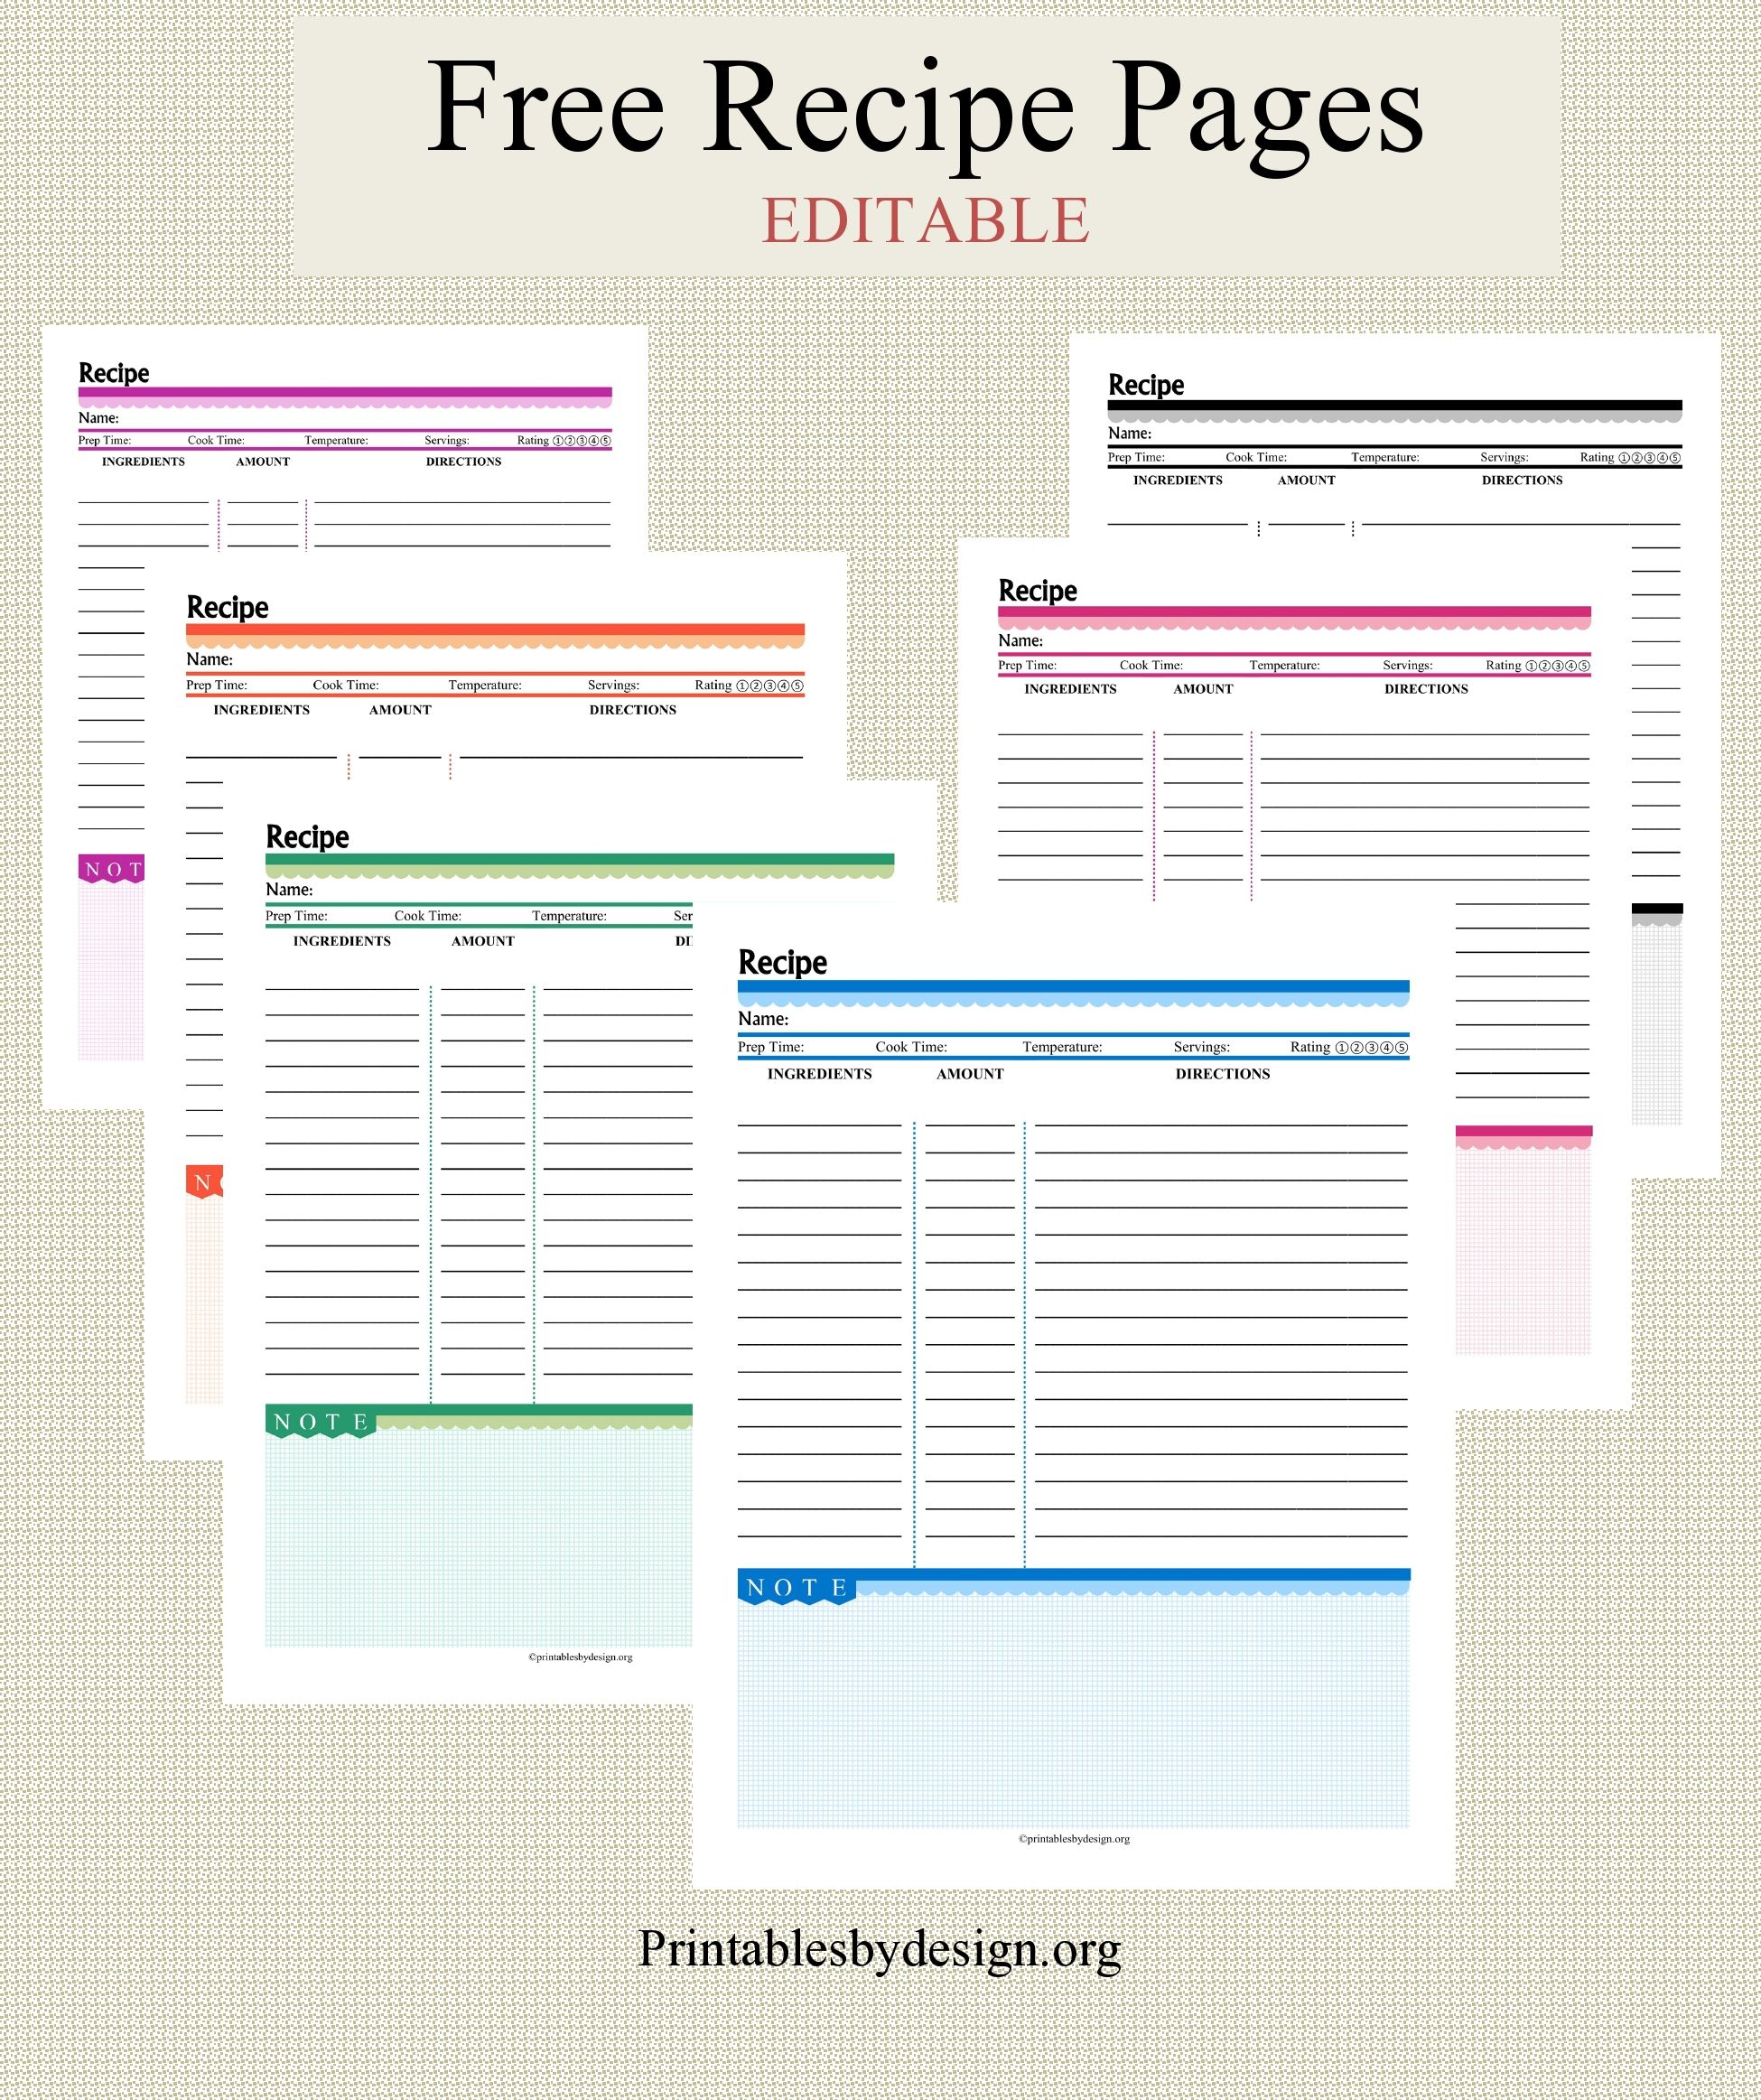 Free Recipe Pages In 6 Colors To Choose From. Editable. | Handmade - Free Printable Recipe Pages